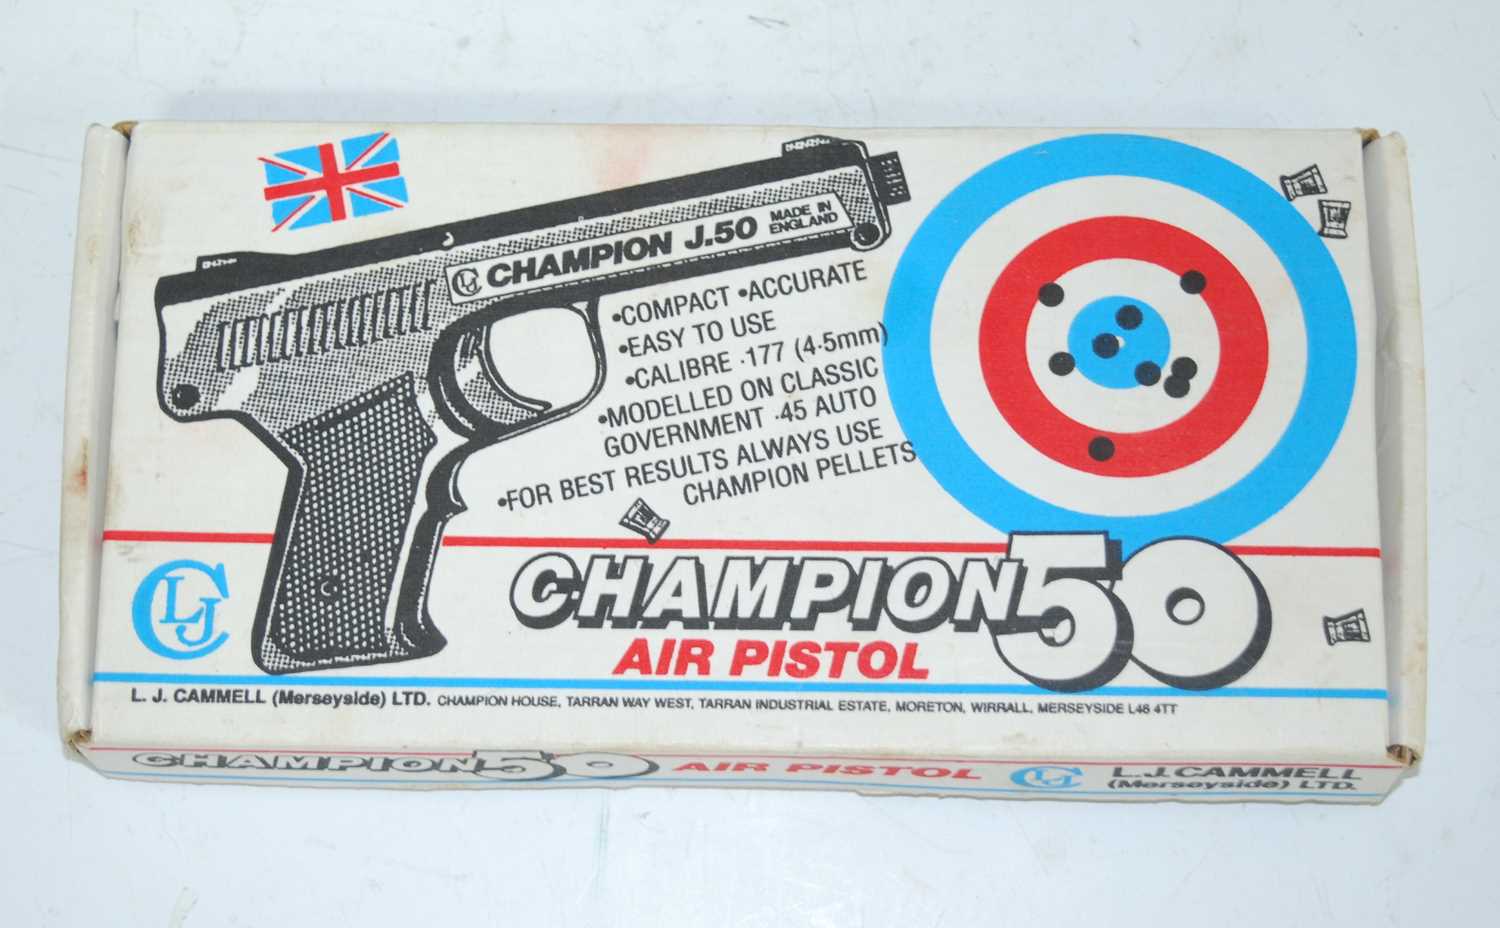 A The Gat .177 calibre air pistol, in original box with accessories, together with a Champion J50 . - Image 2 of 4